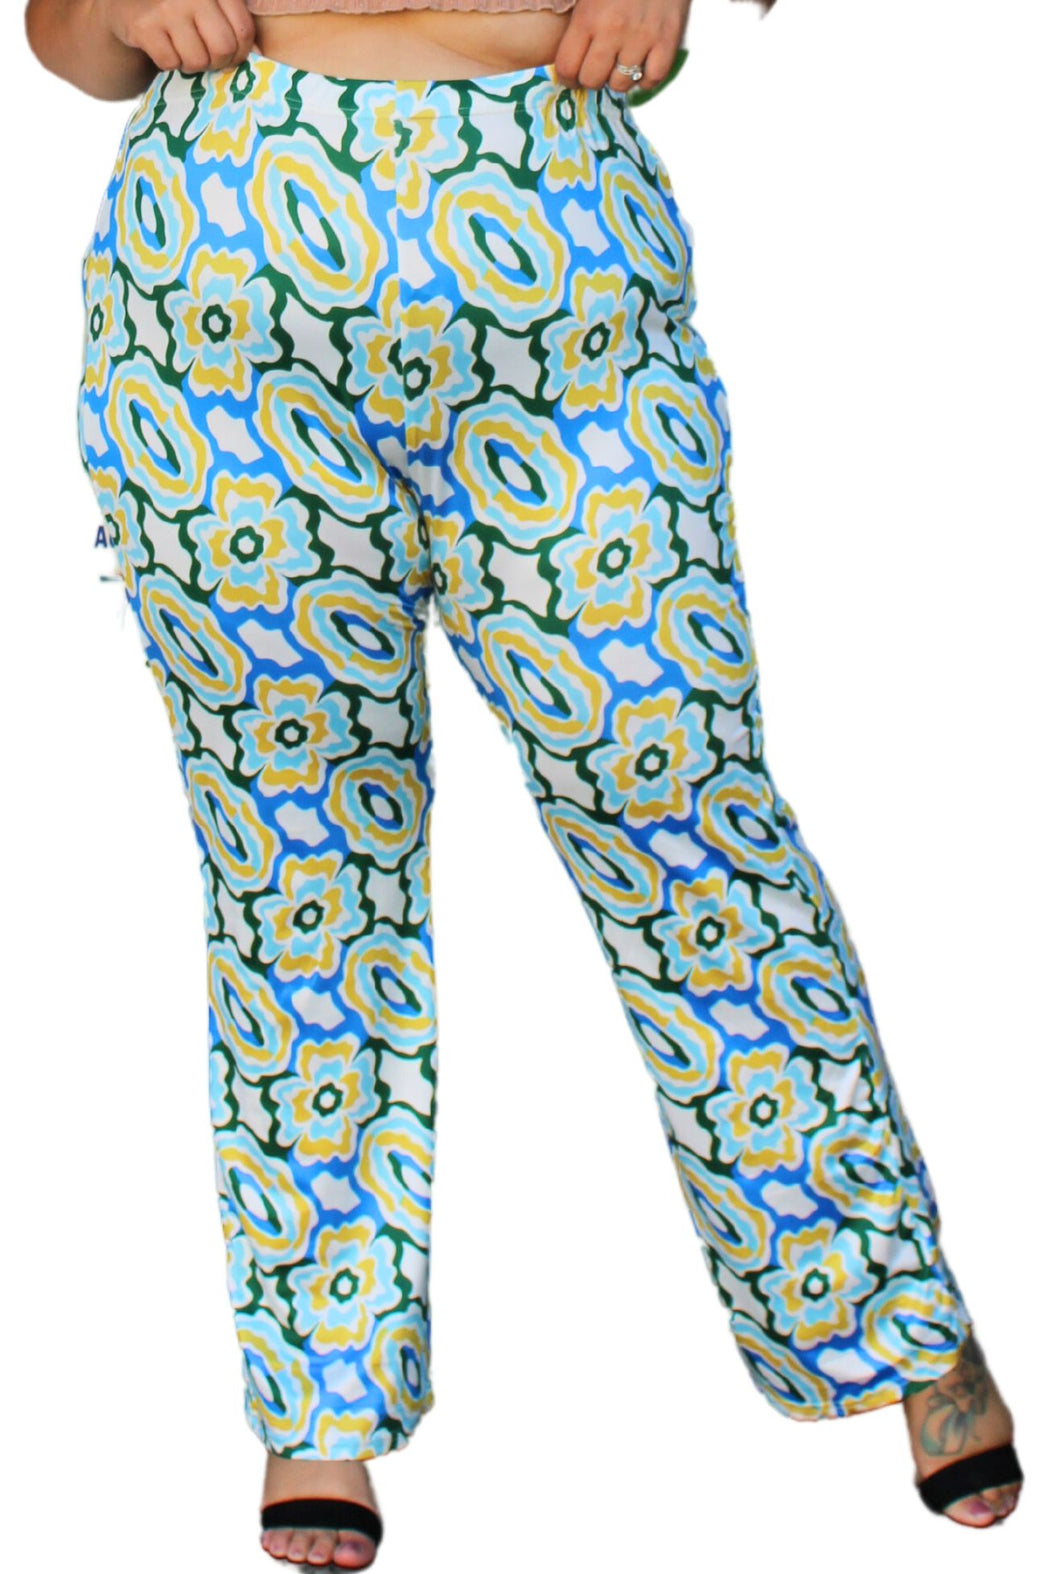 Shein Flared Pants with Funky Blue, Green, White and Yellow Design, Size 4XL